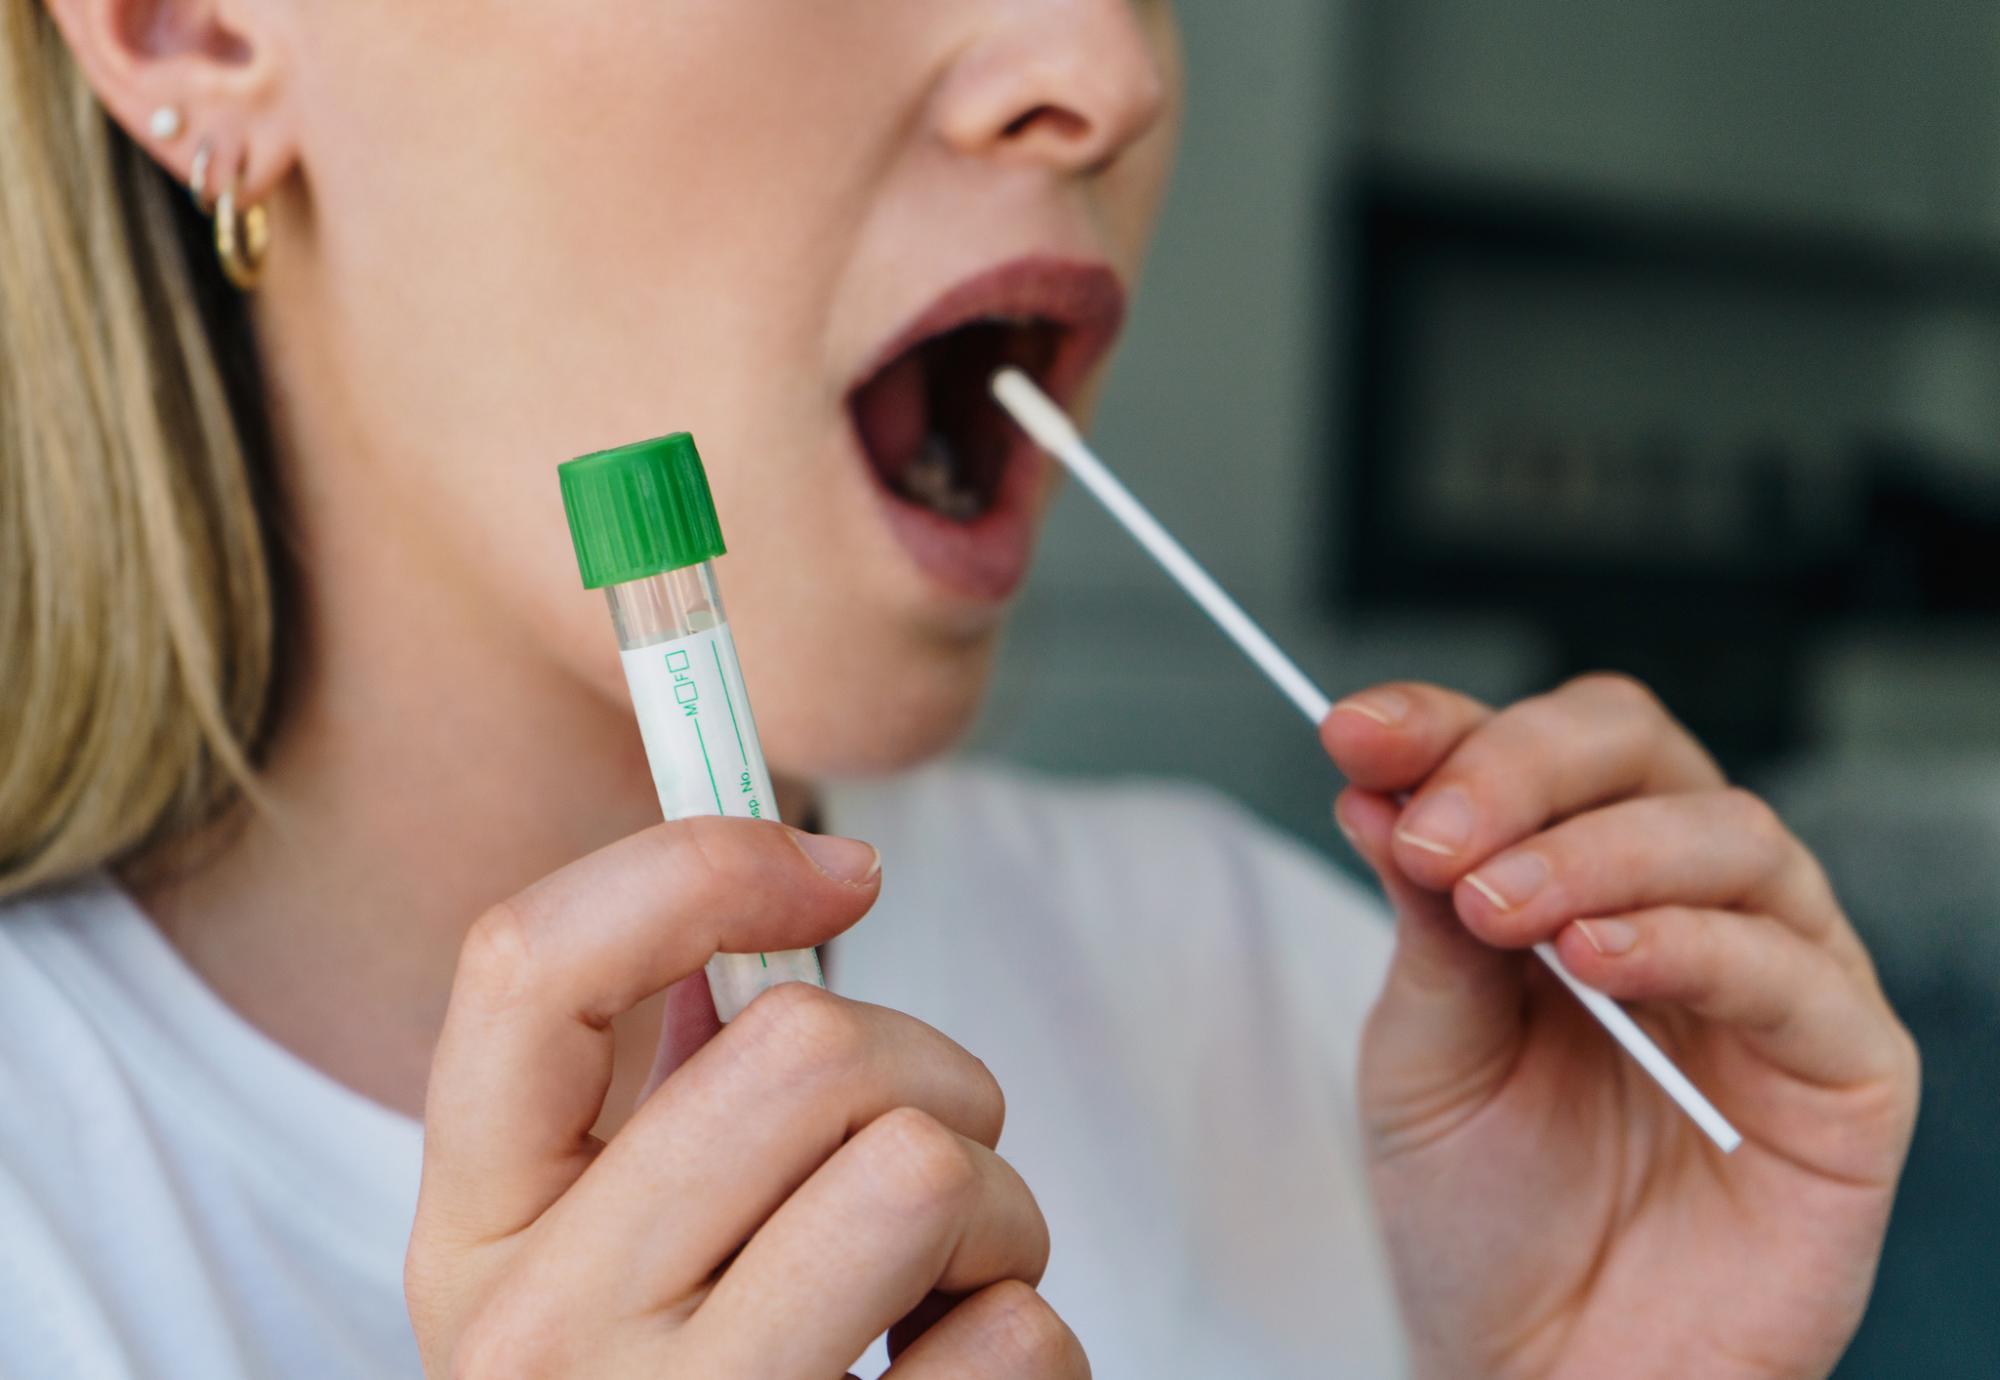 Woman inserts Covid-19 test into her mouth. 